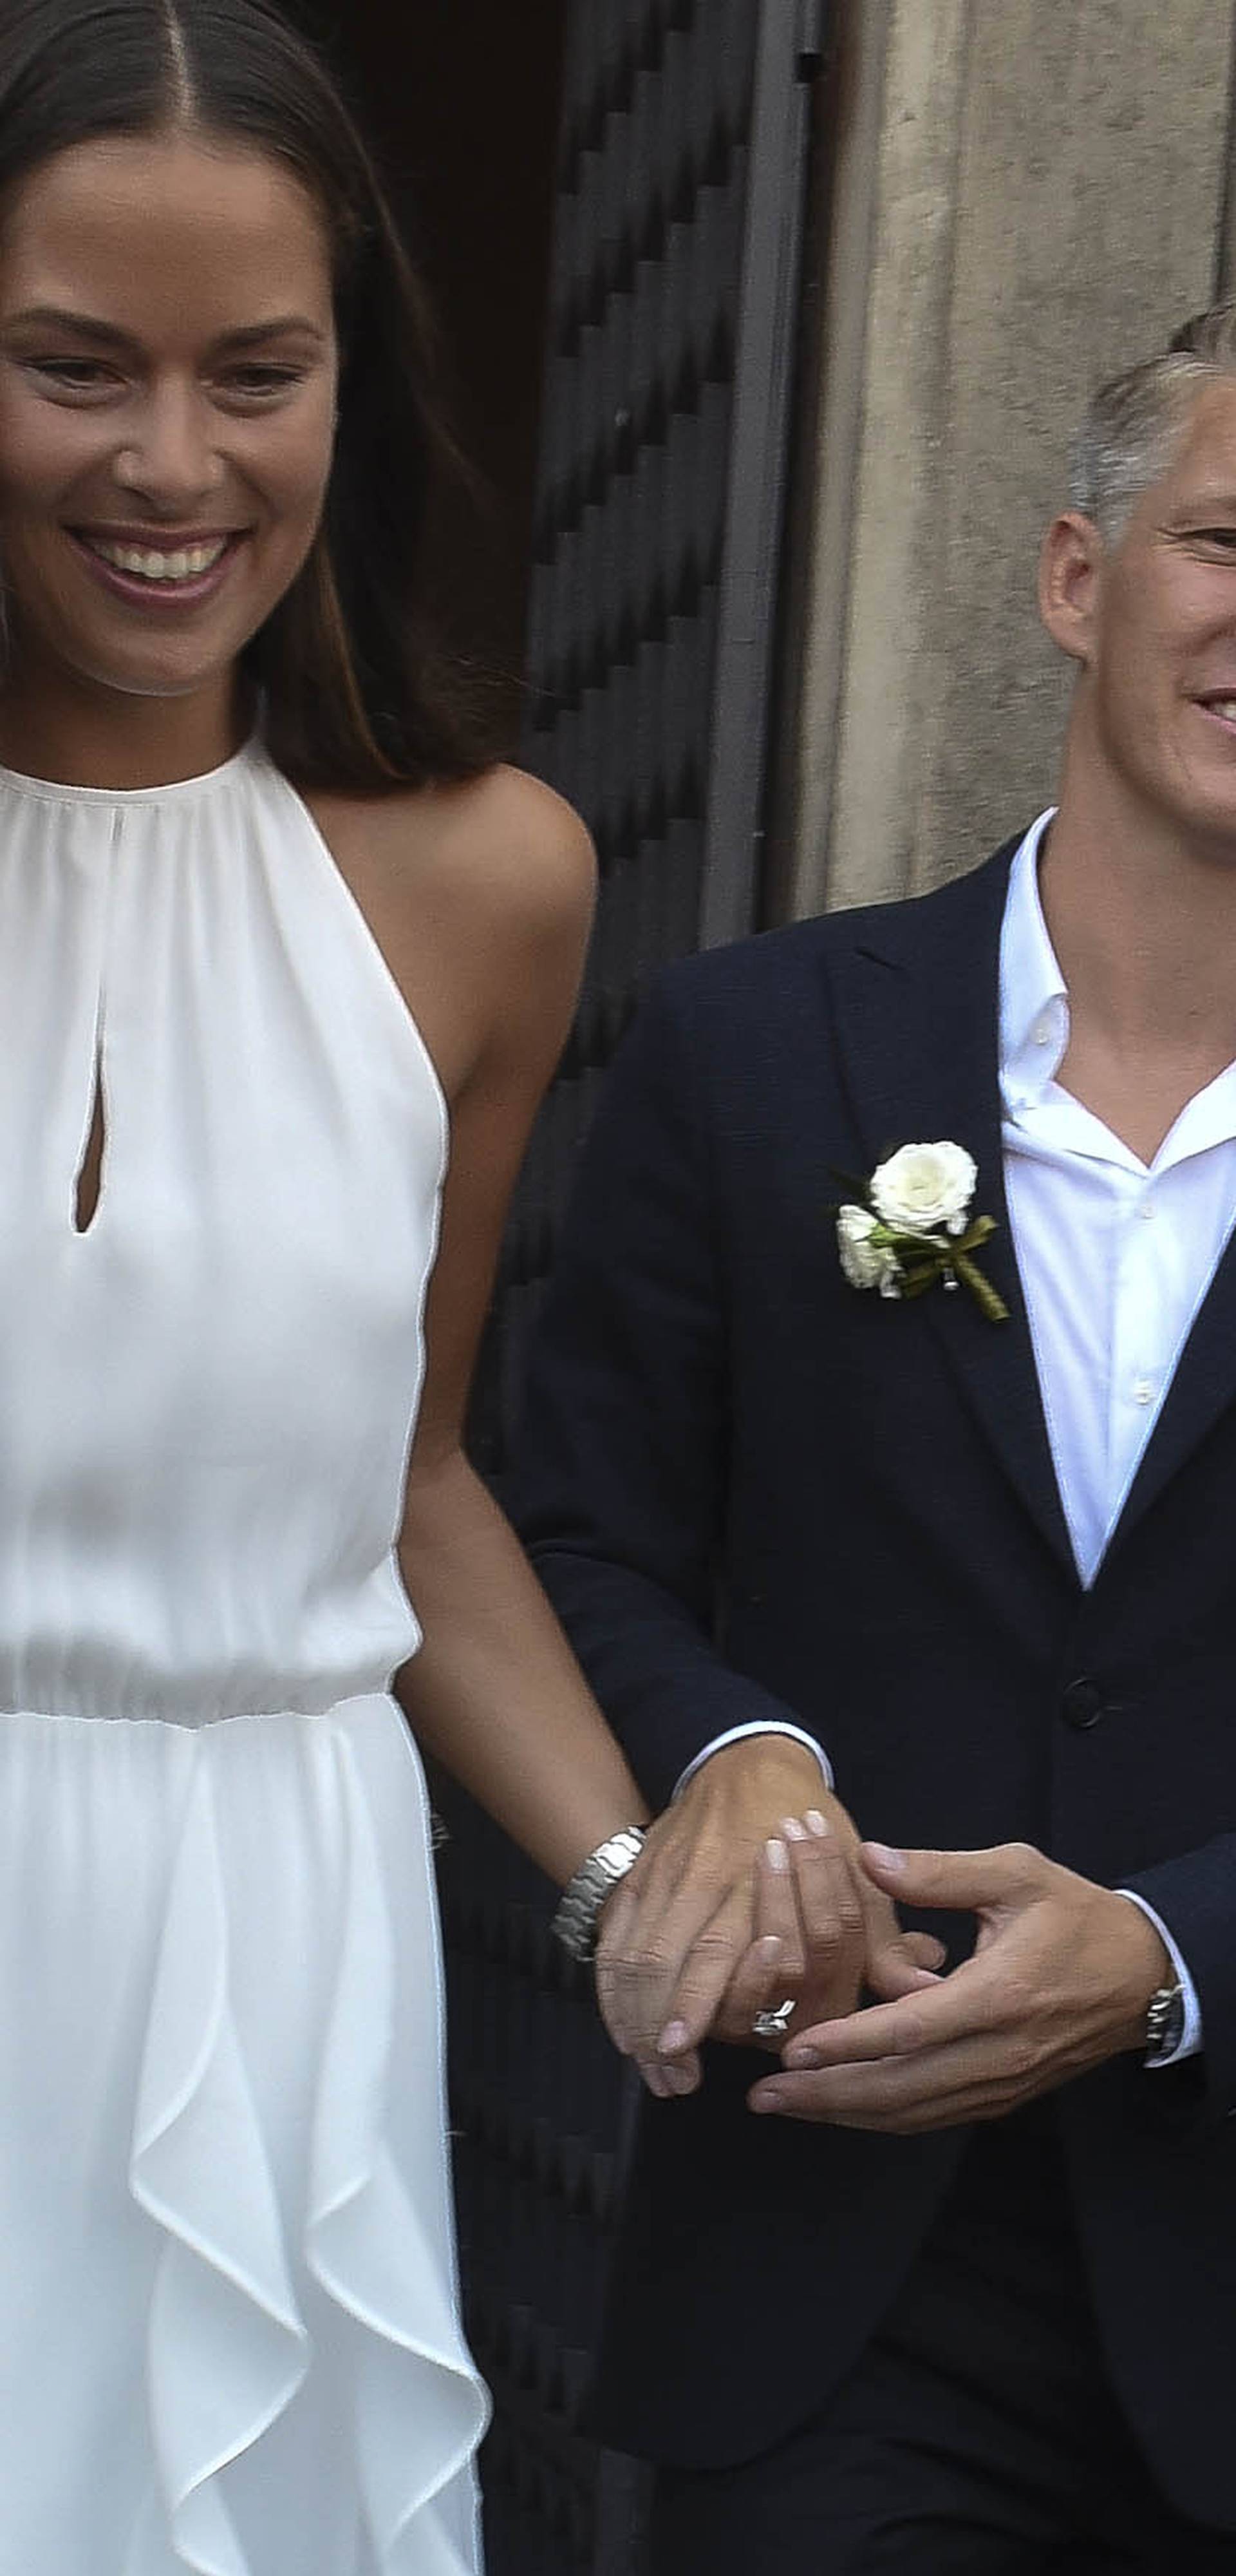 Manchester Utd and Germany National team player Bastian Schweinsteiger ties the know with his fiancee' Ana Ivanovic at Venice City Hall. NO ITALY NO GERMANY